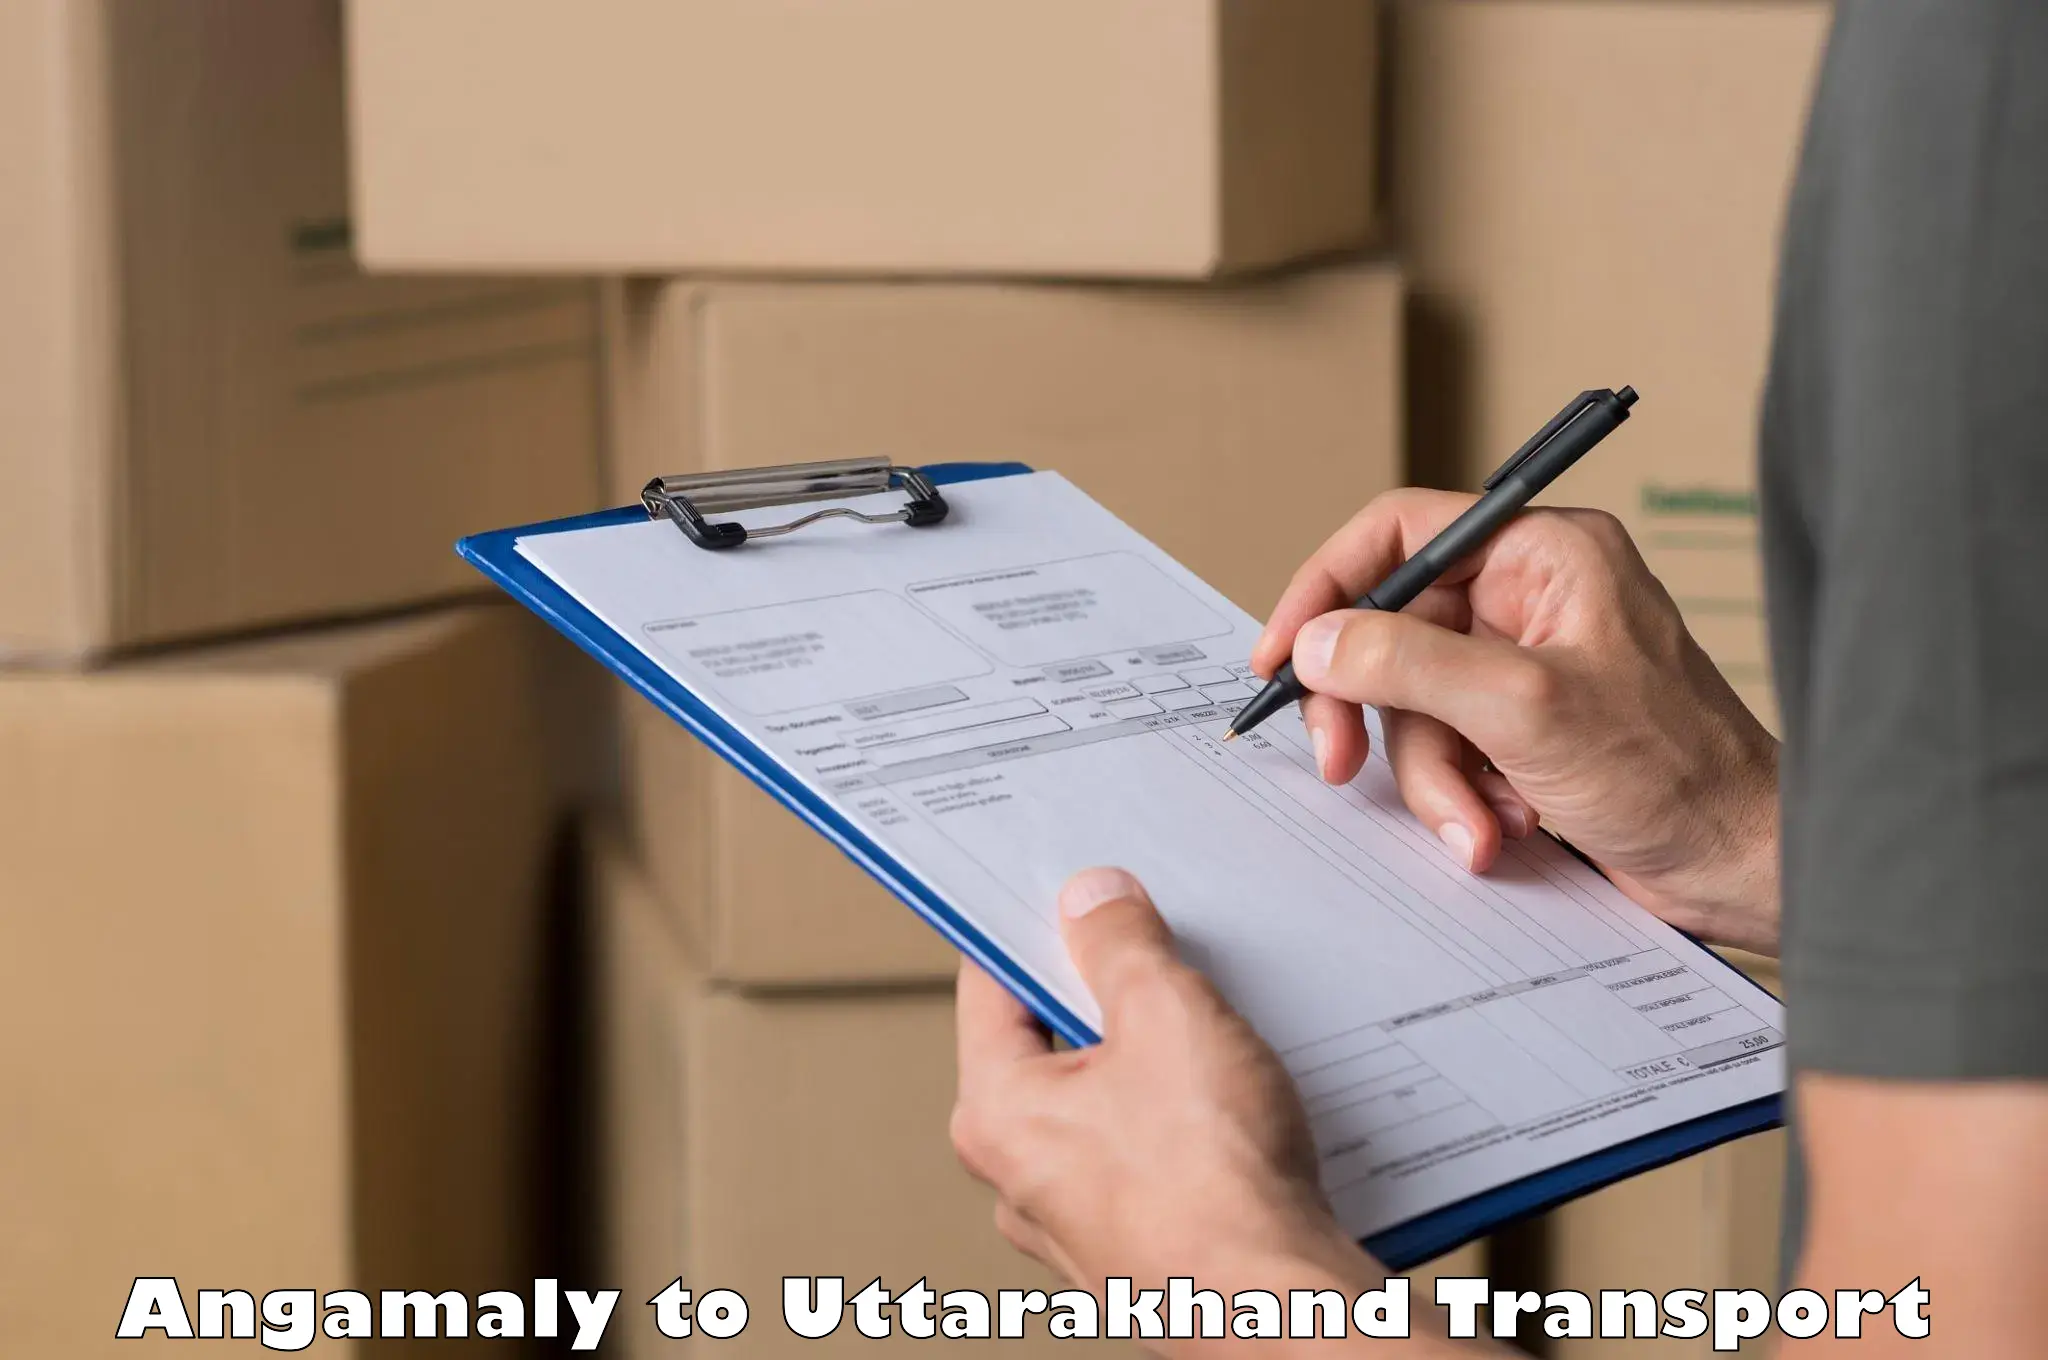 Container transport service Angamaly to Rishikesh